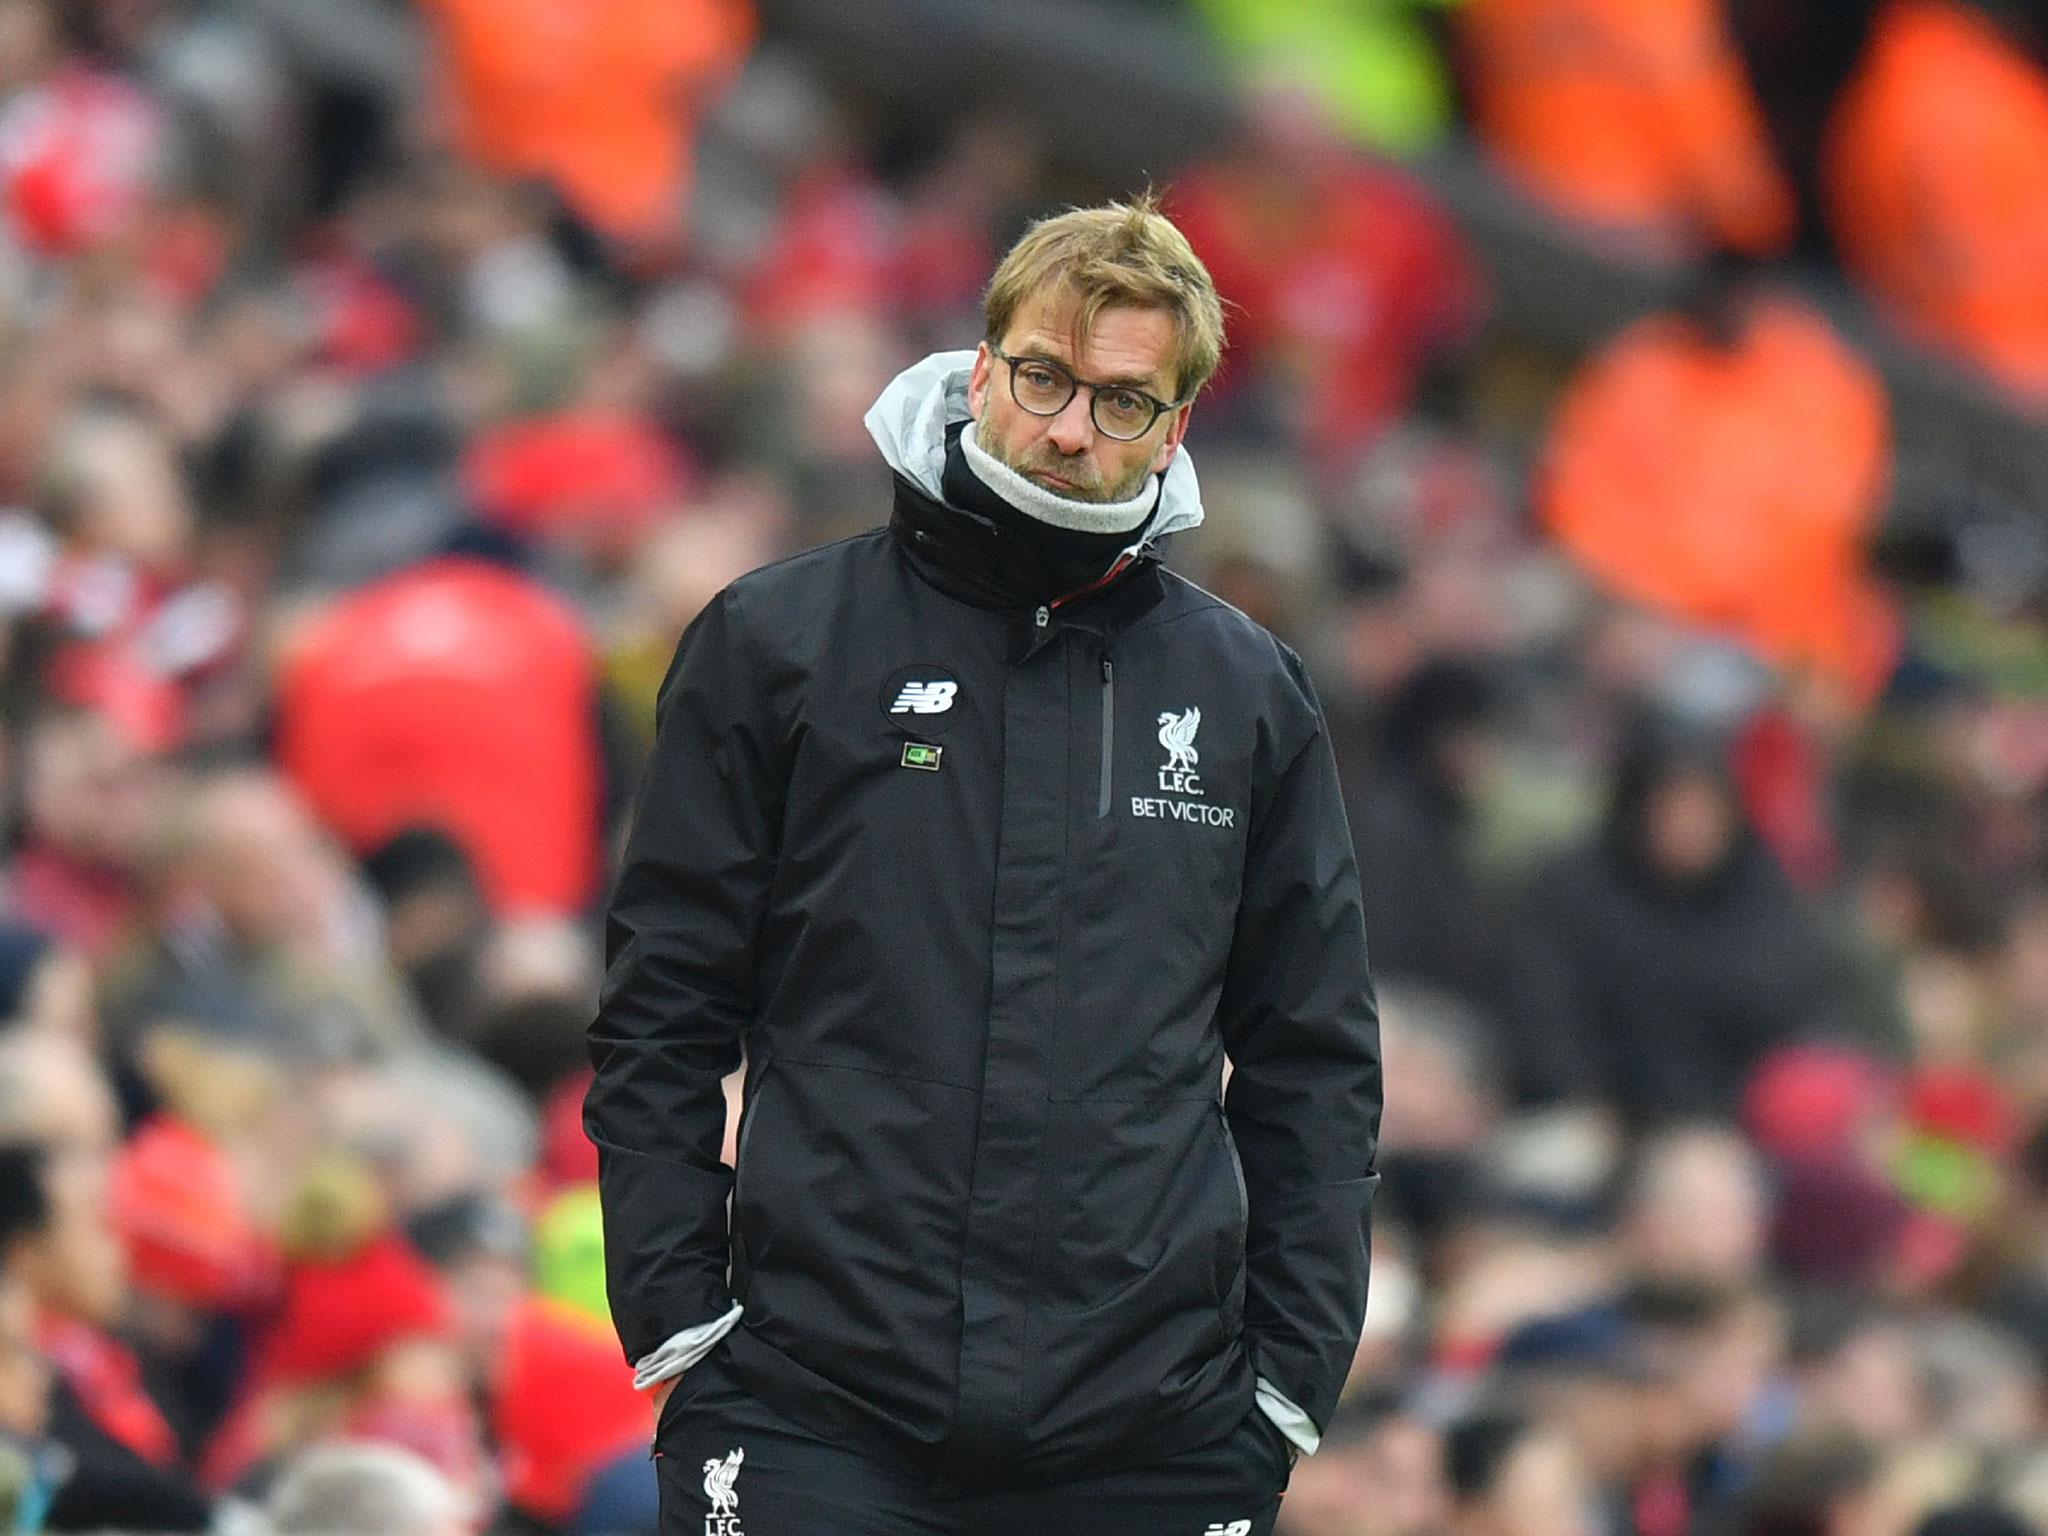 Klopp has said his side will give their all against Southampton